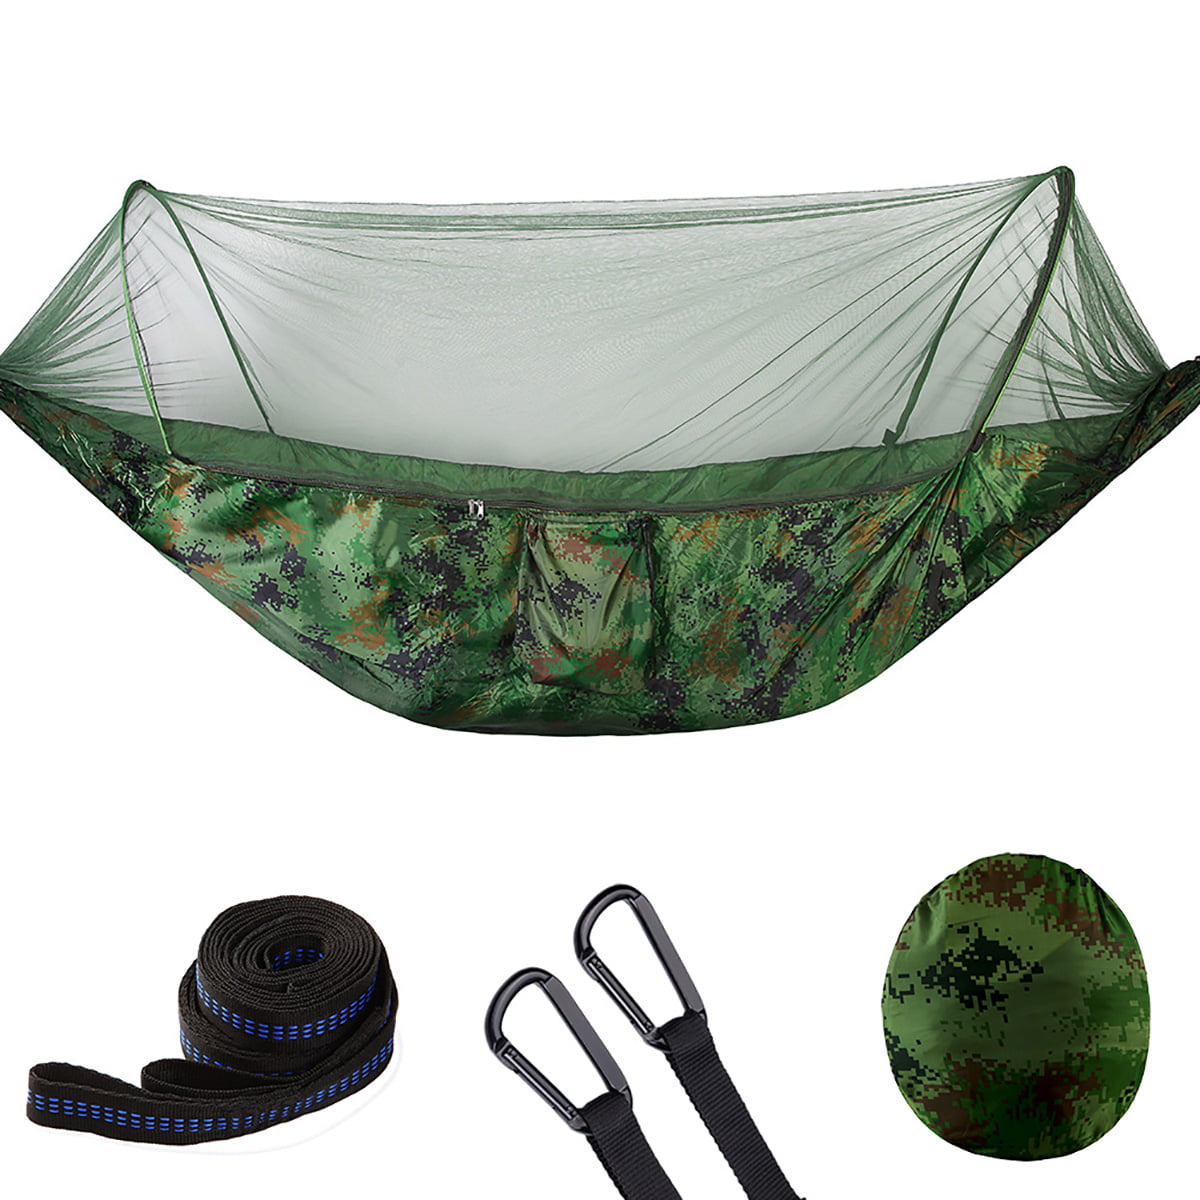 Outdoor Camping Double Person Travel Tent Hanging Hammock Bed With Mosquito Net 